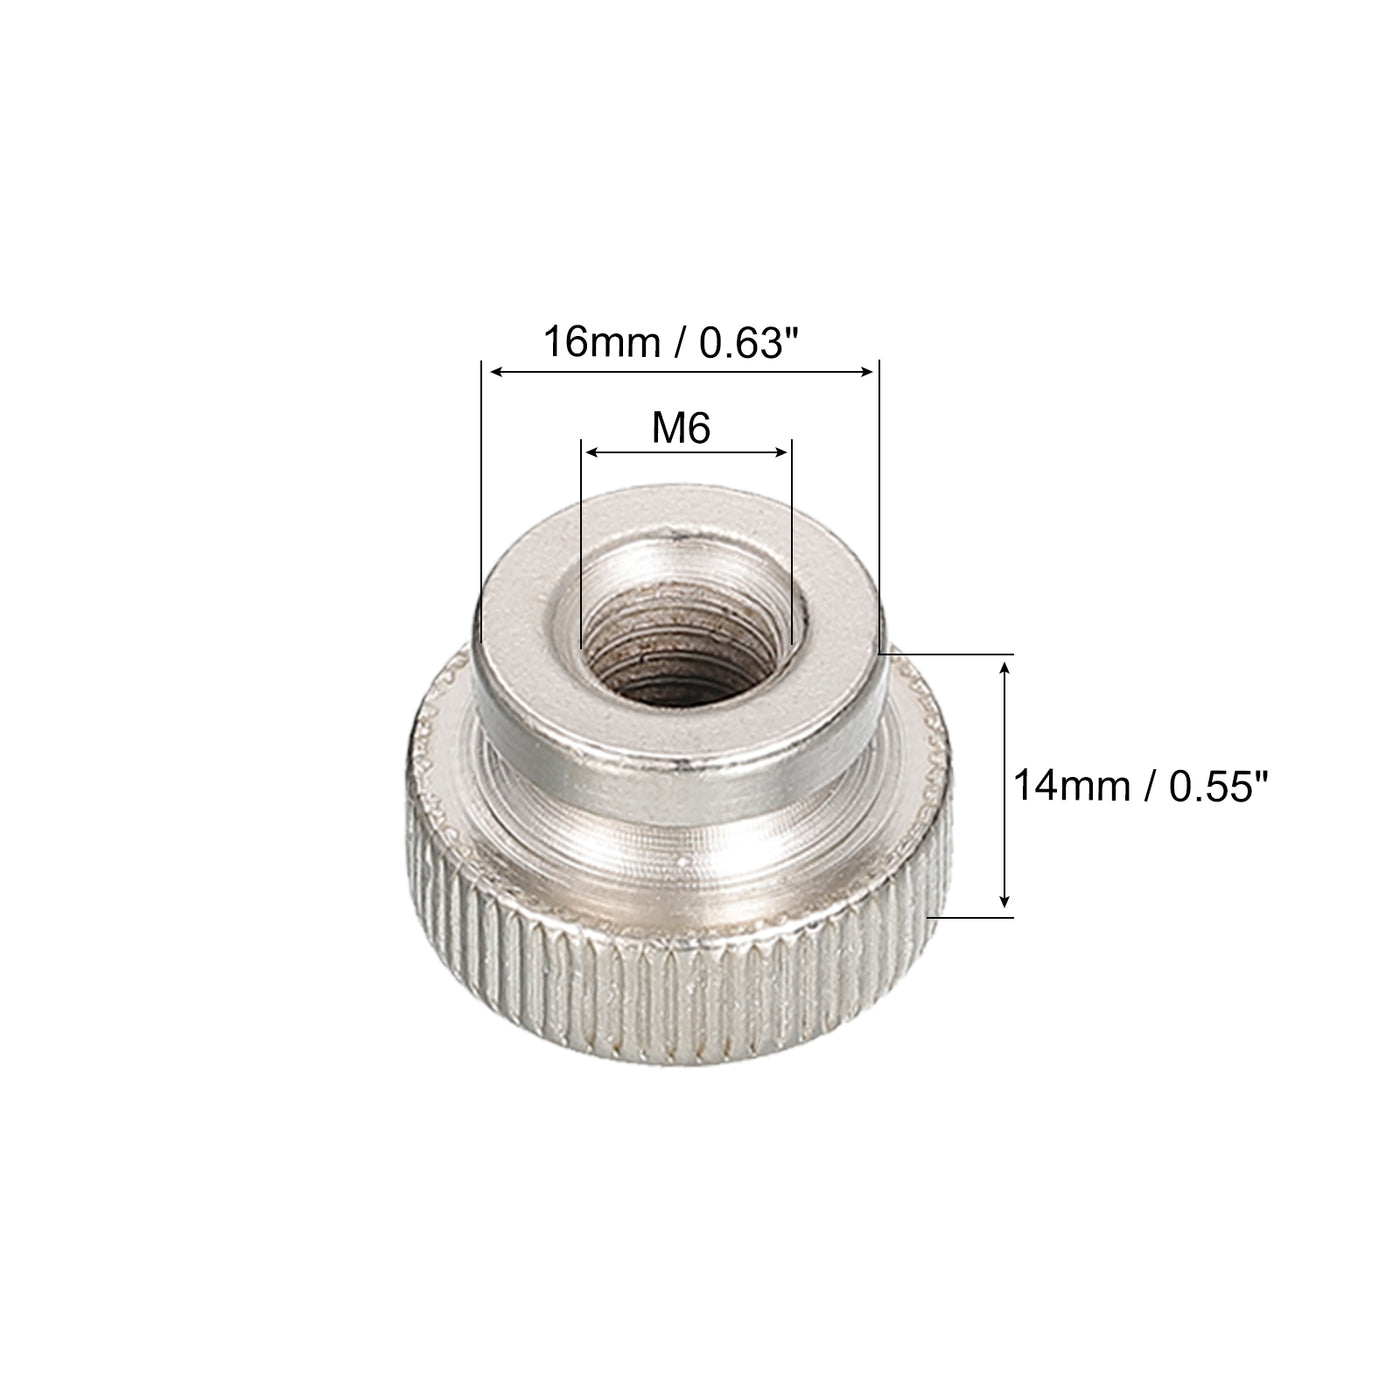 uxcell Uxcell Knurled Thumb Nuts,Carbon Steel Knurled Nut with Collar High Head Blind Hole Knurled Thumb Nuts